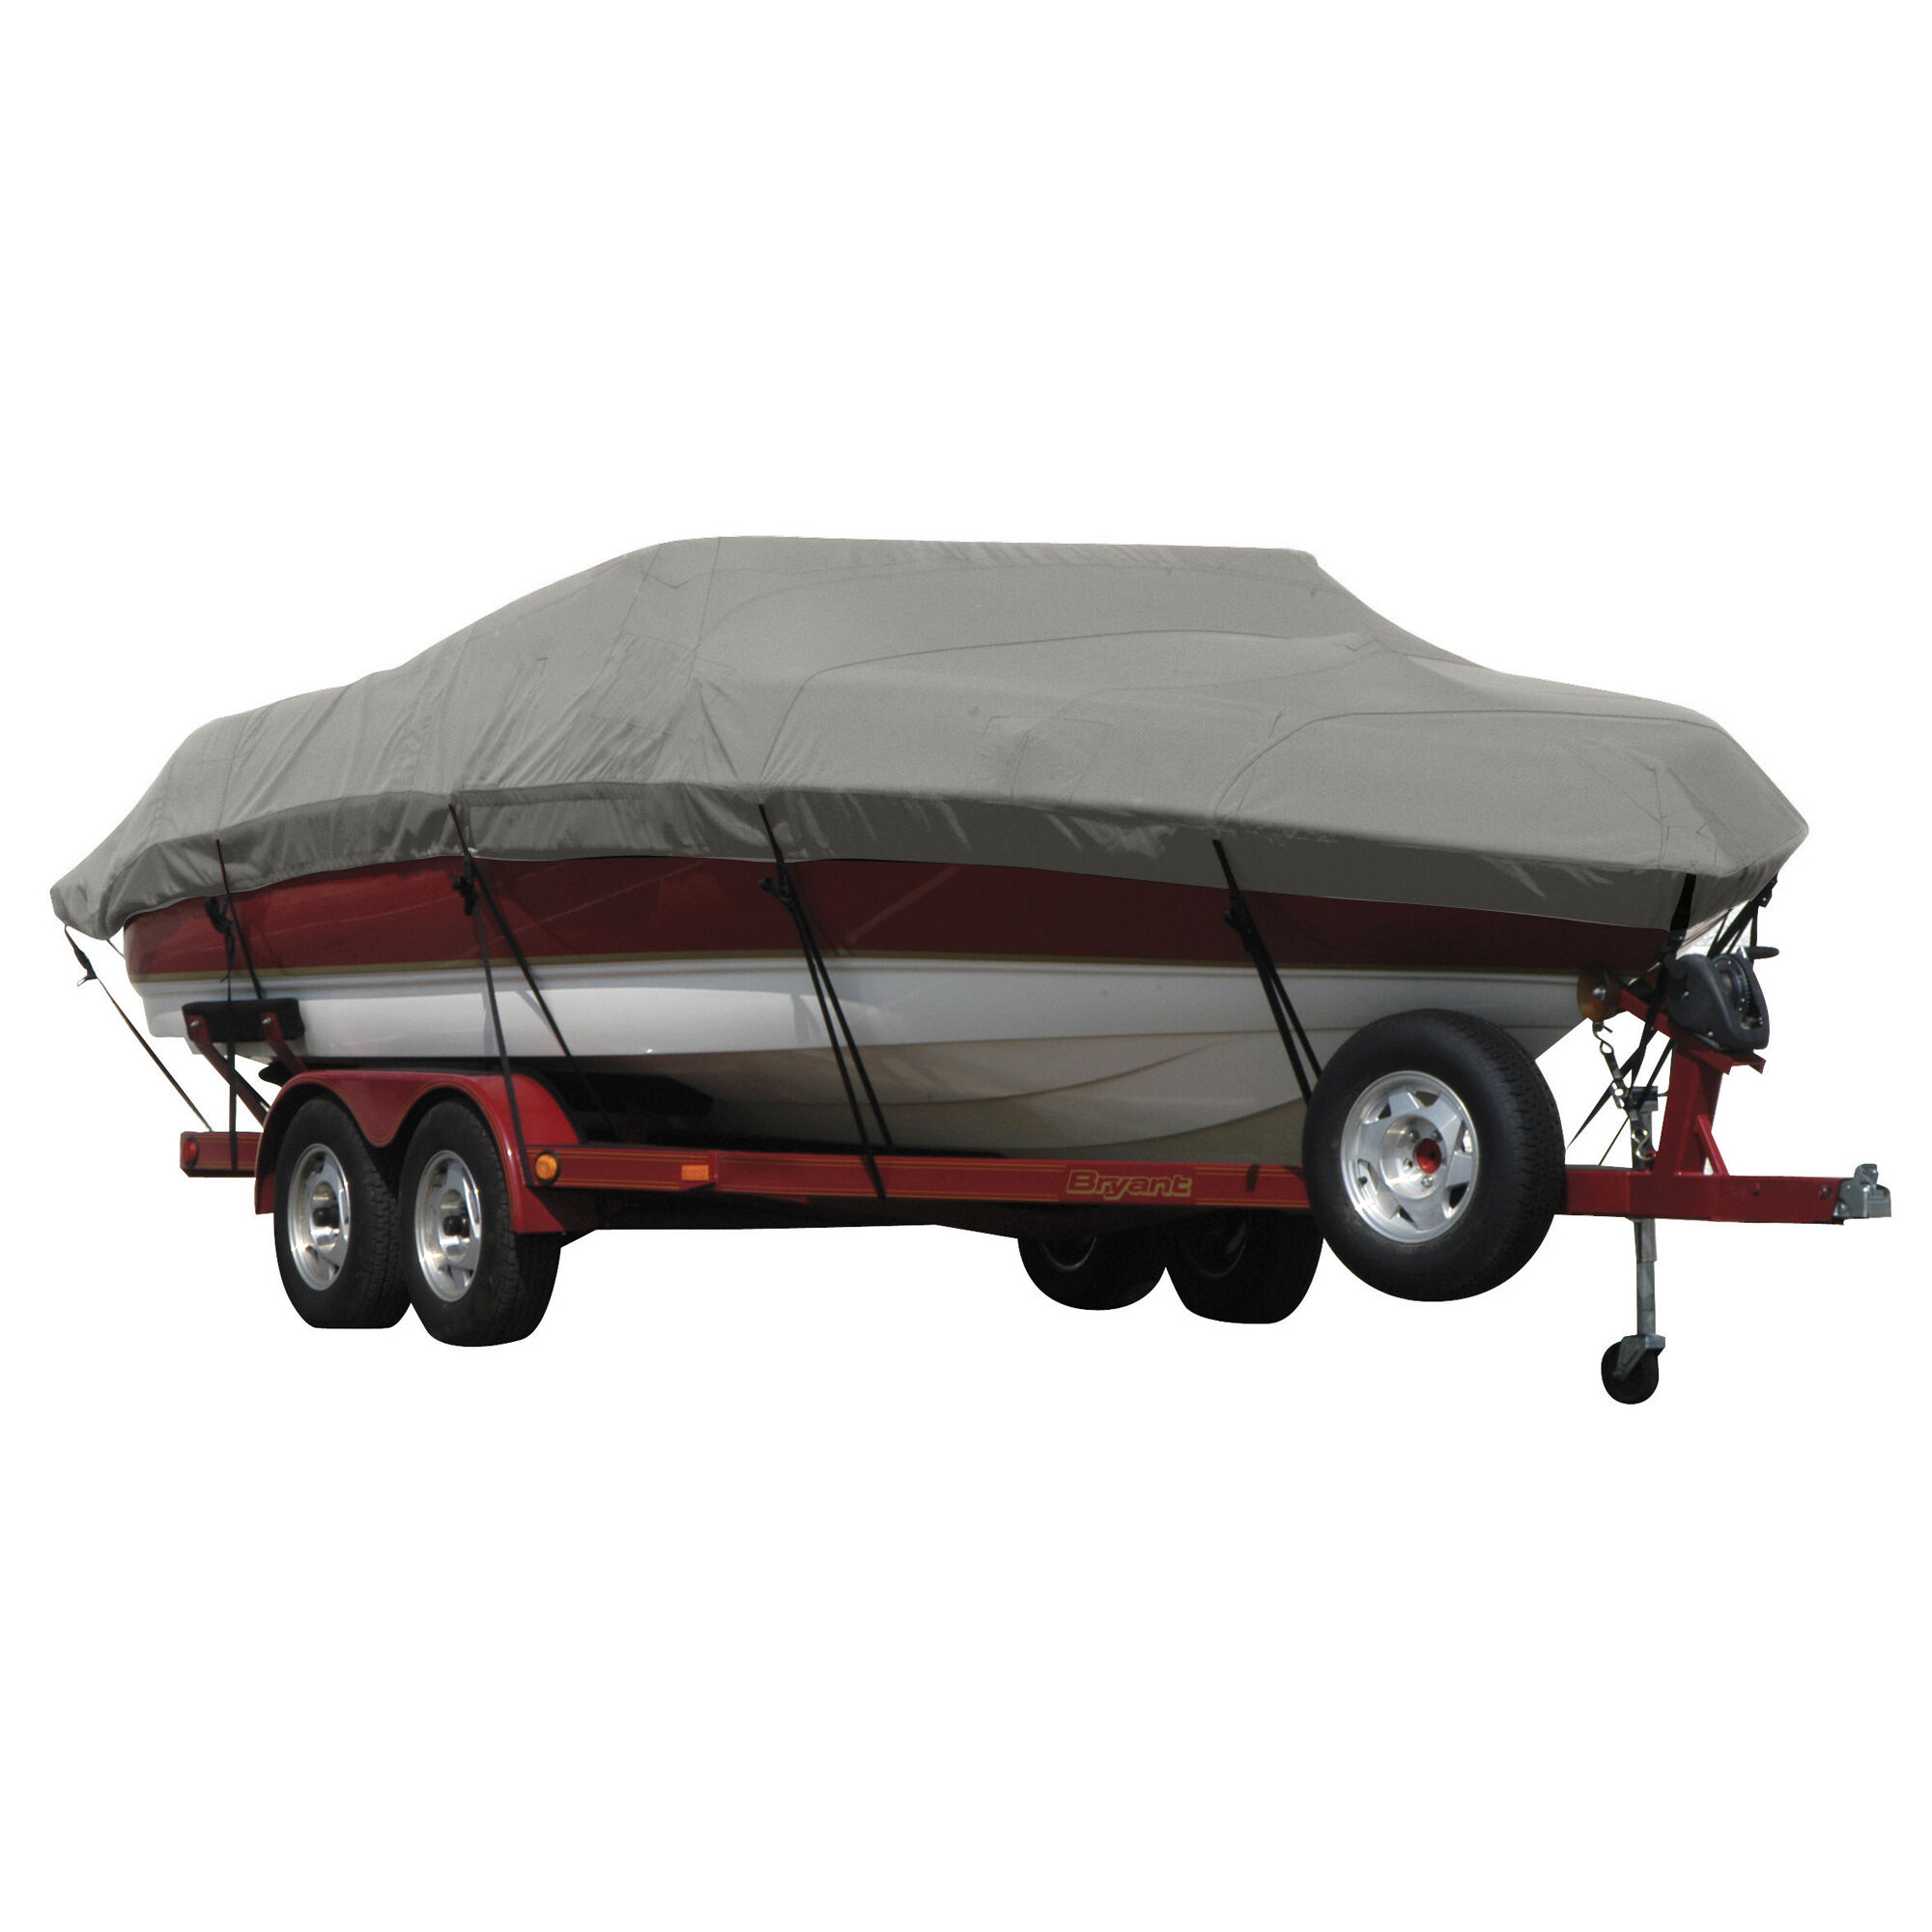 Covermate Exact Fit Sunbrella Boat Cover for Campion Chase 800 Chase 800 I/O. Charcoal Grey Heather in Charcoal Grey Heather